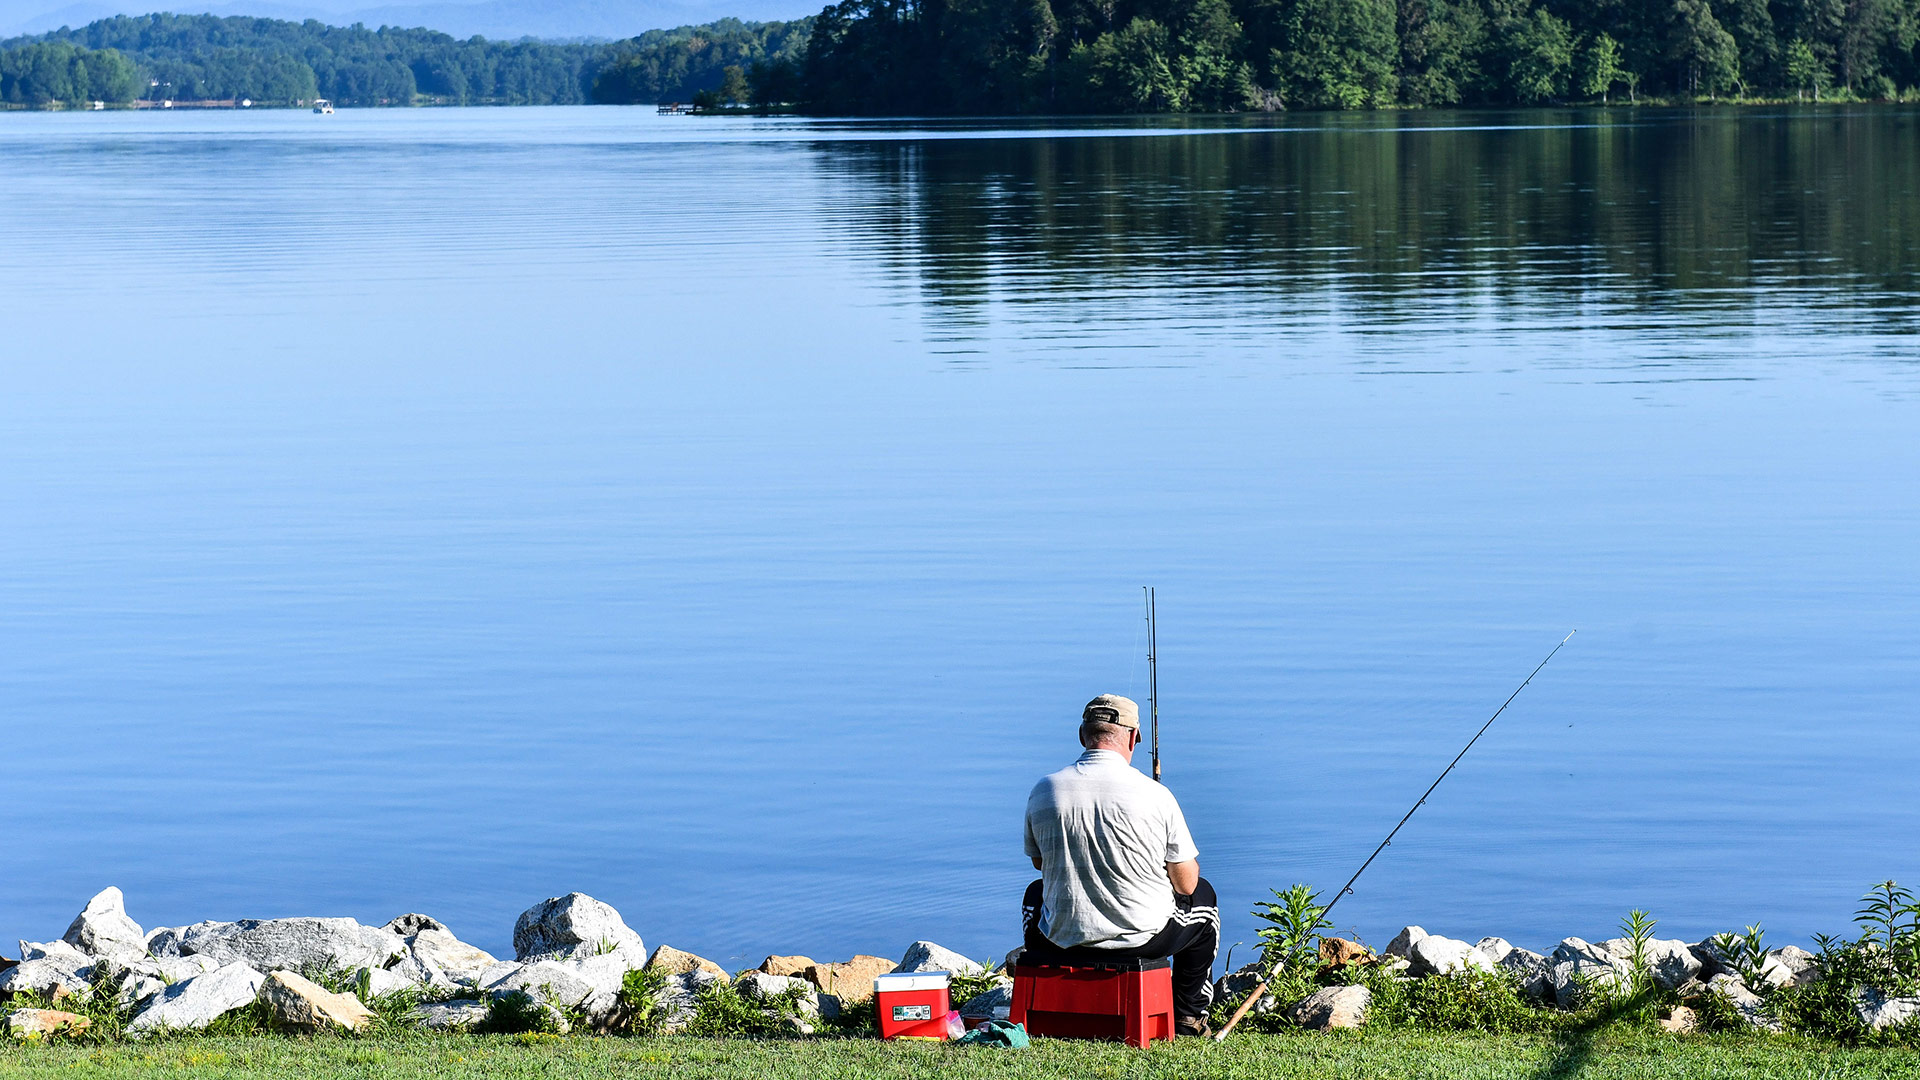 It’s Time to Renew Your Fishing Permits for Lake Robinson and Lake Cunningham